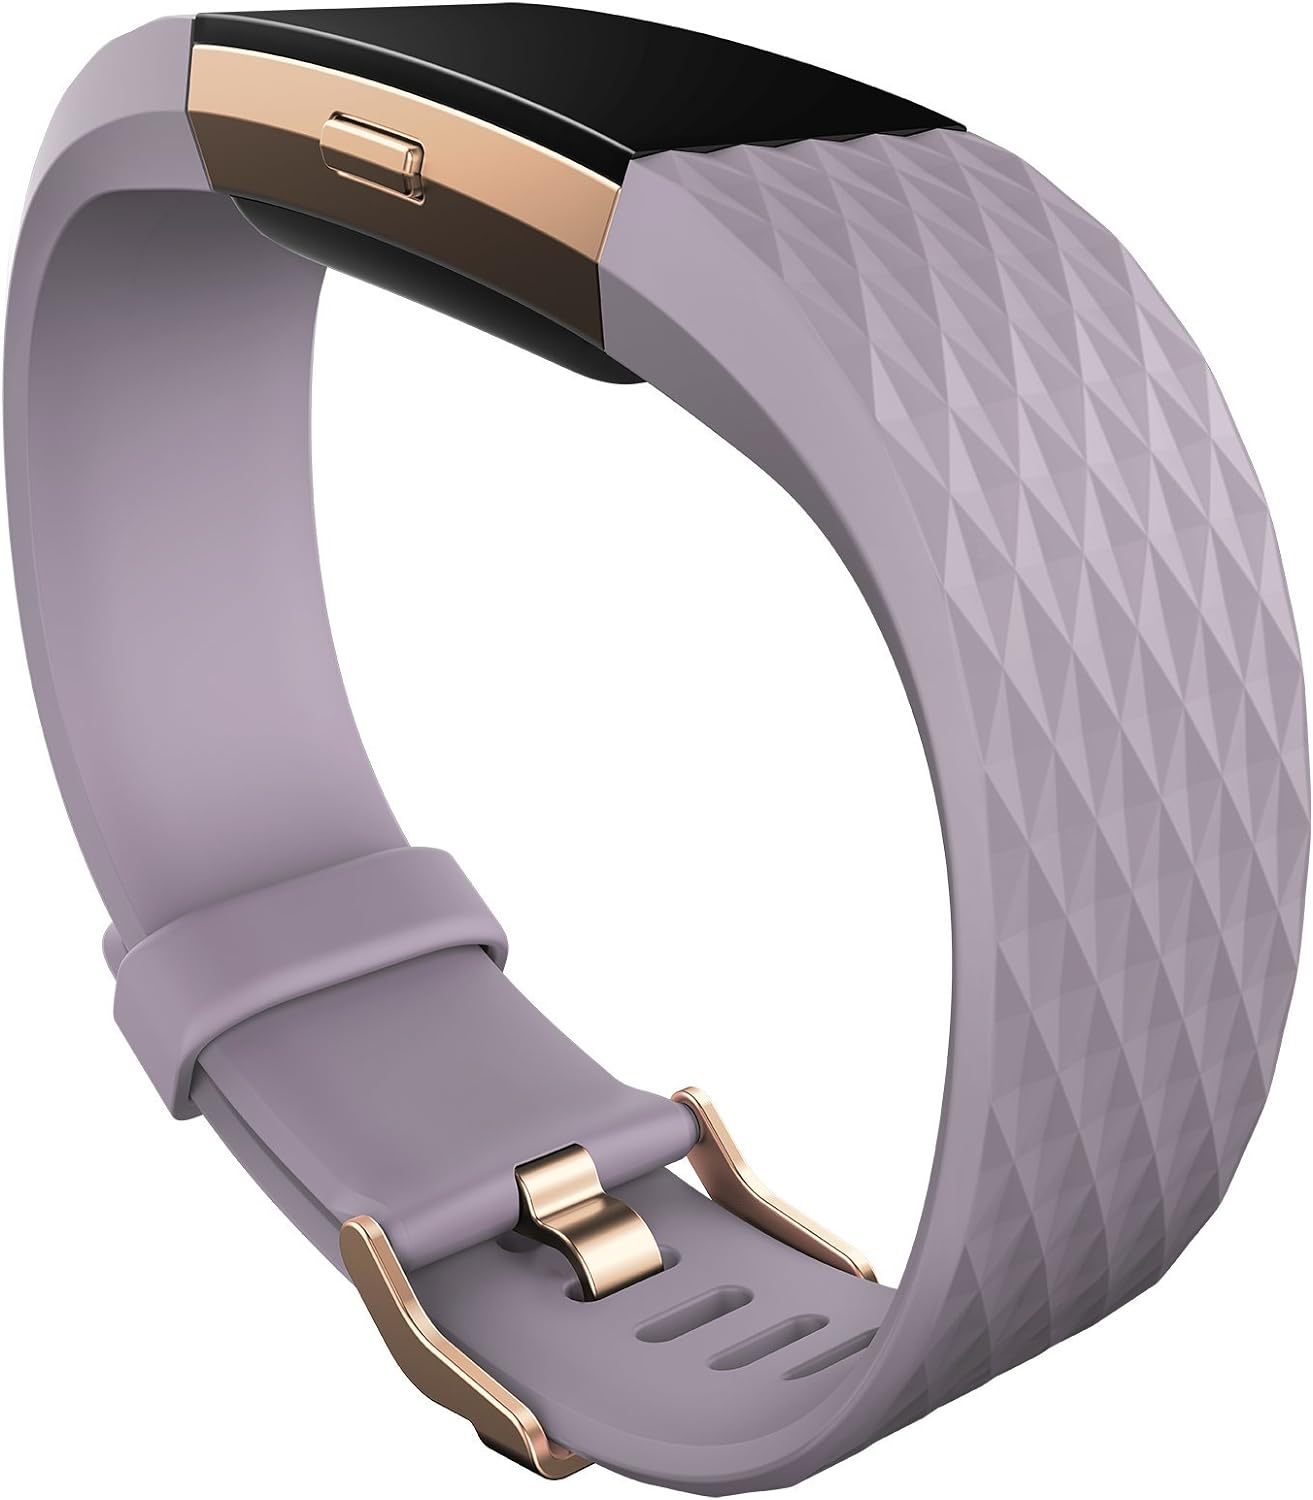 Fitbit Charge 2 Activity Tracker - Lavender Special Edition - Excellent